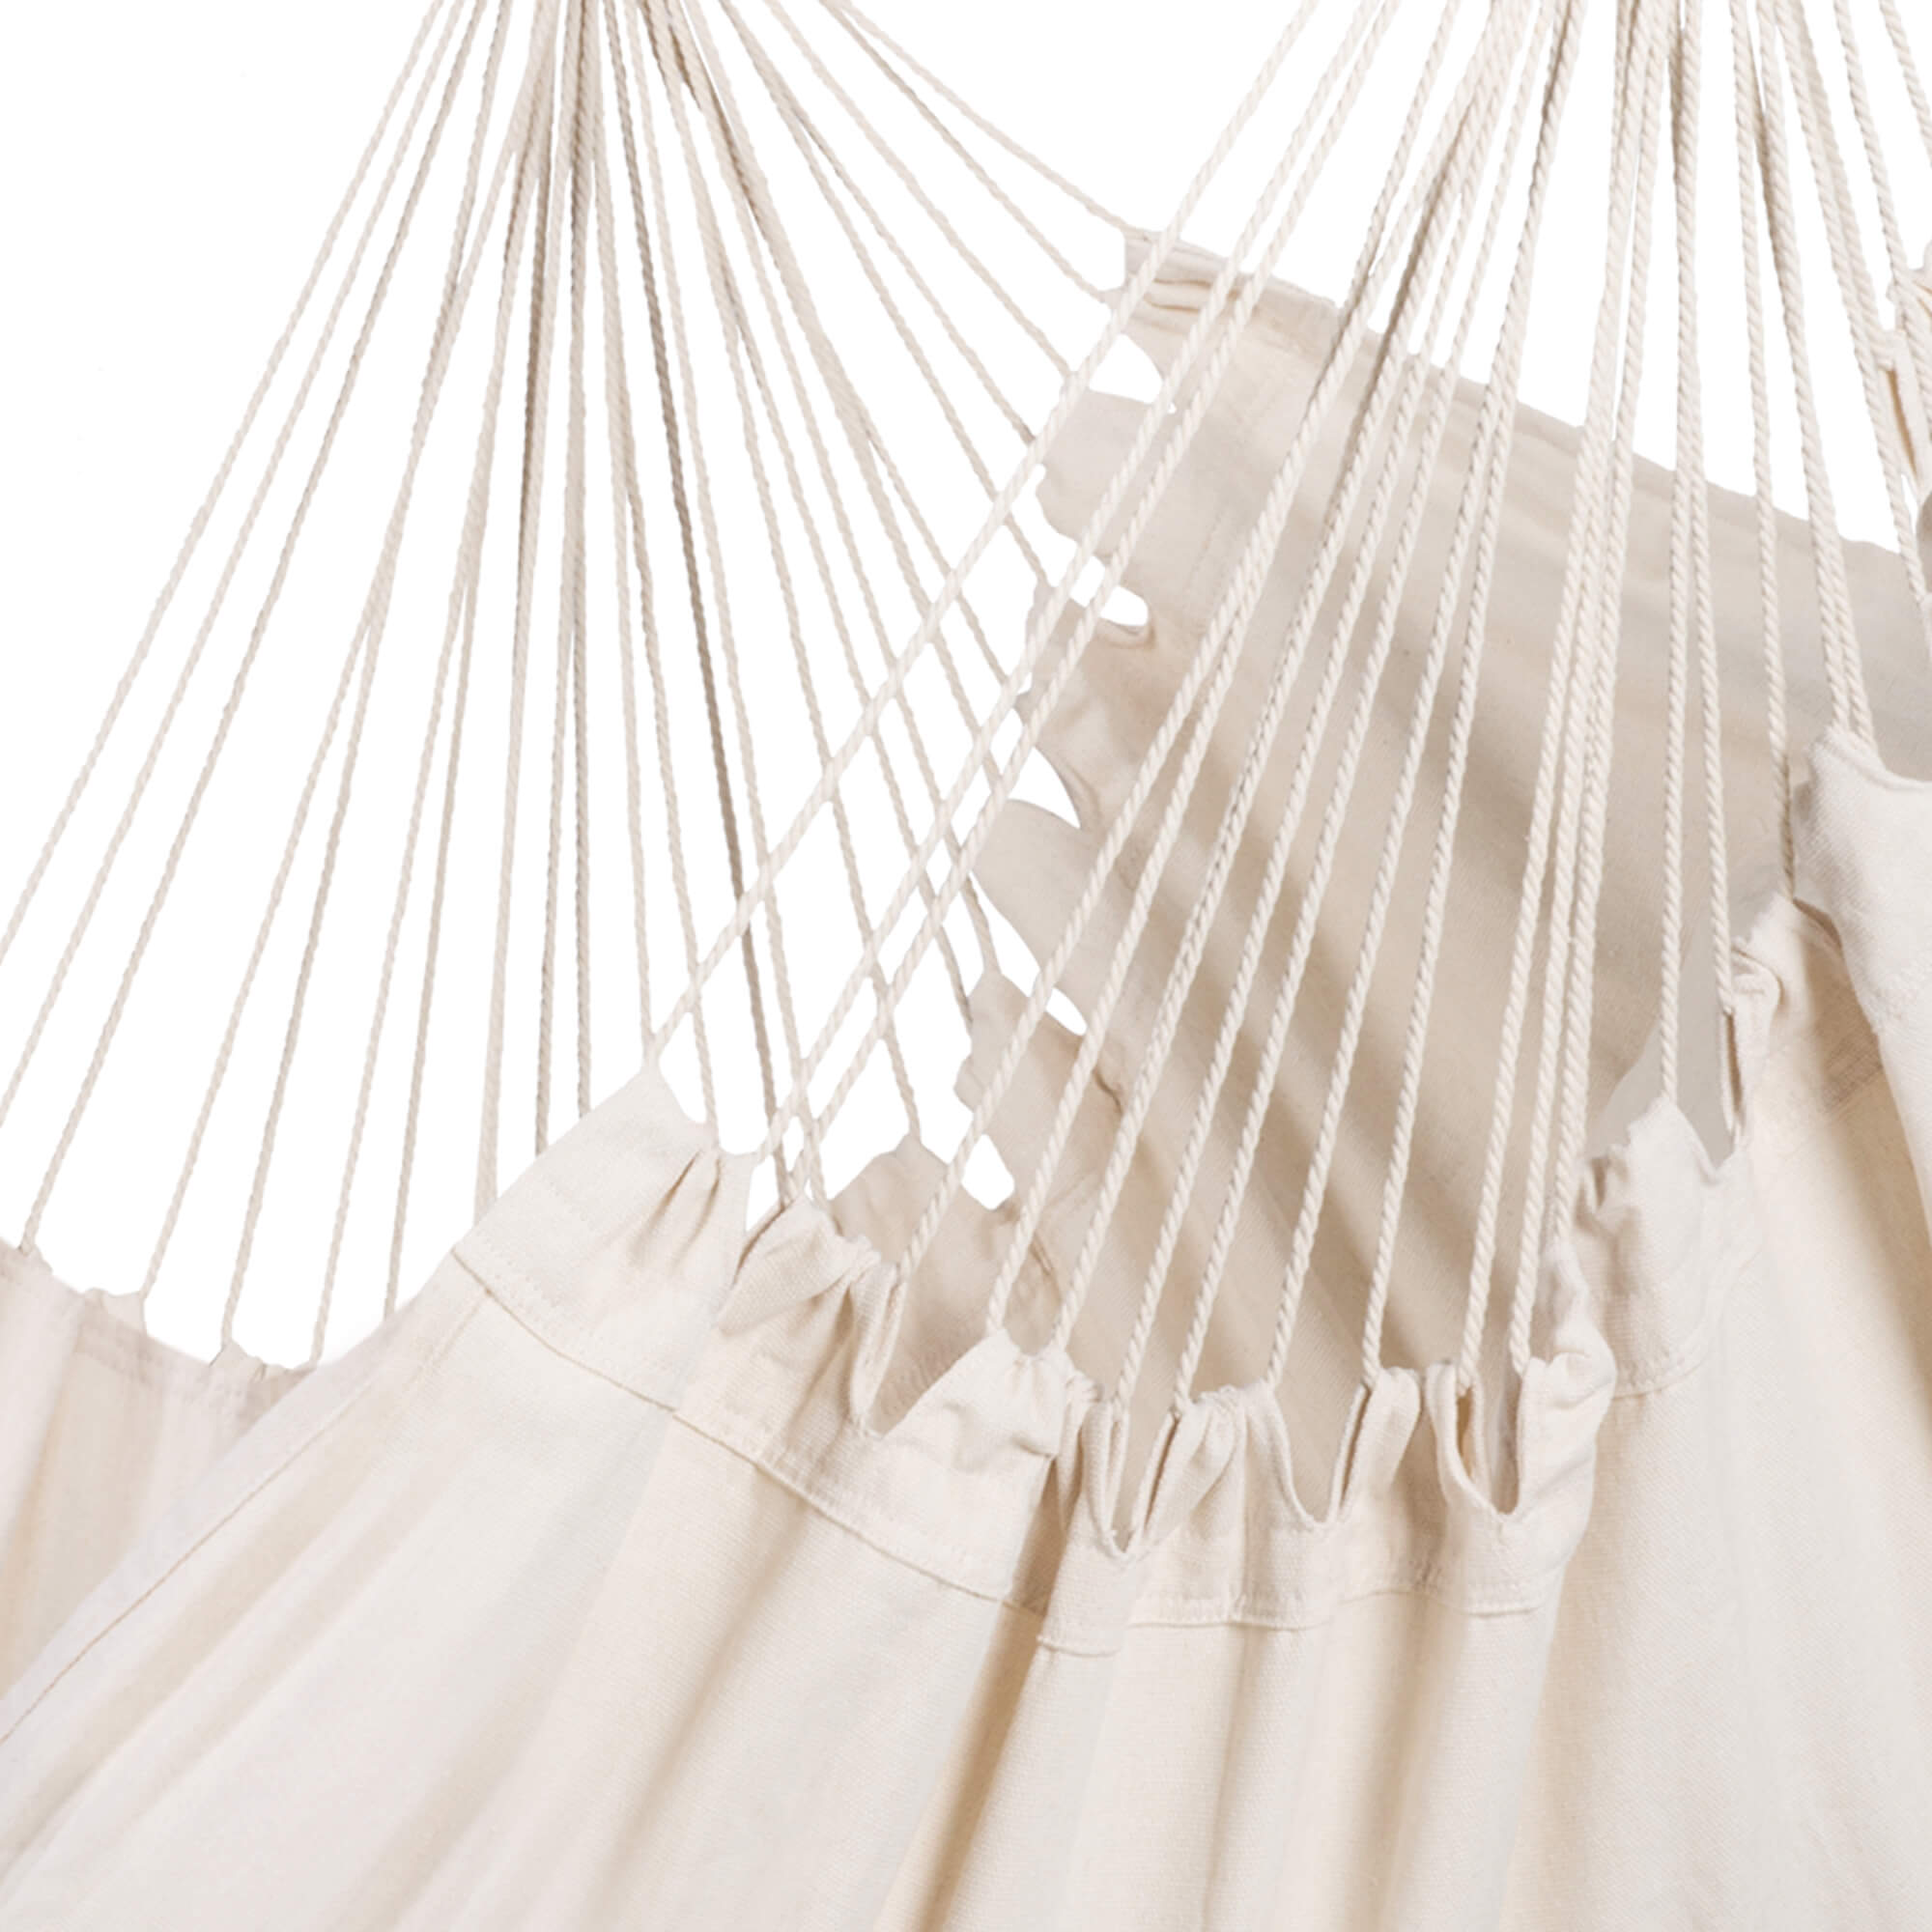 SUNCREAT-Hanging-Hammock-Chair#color_white